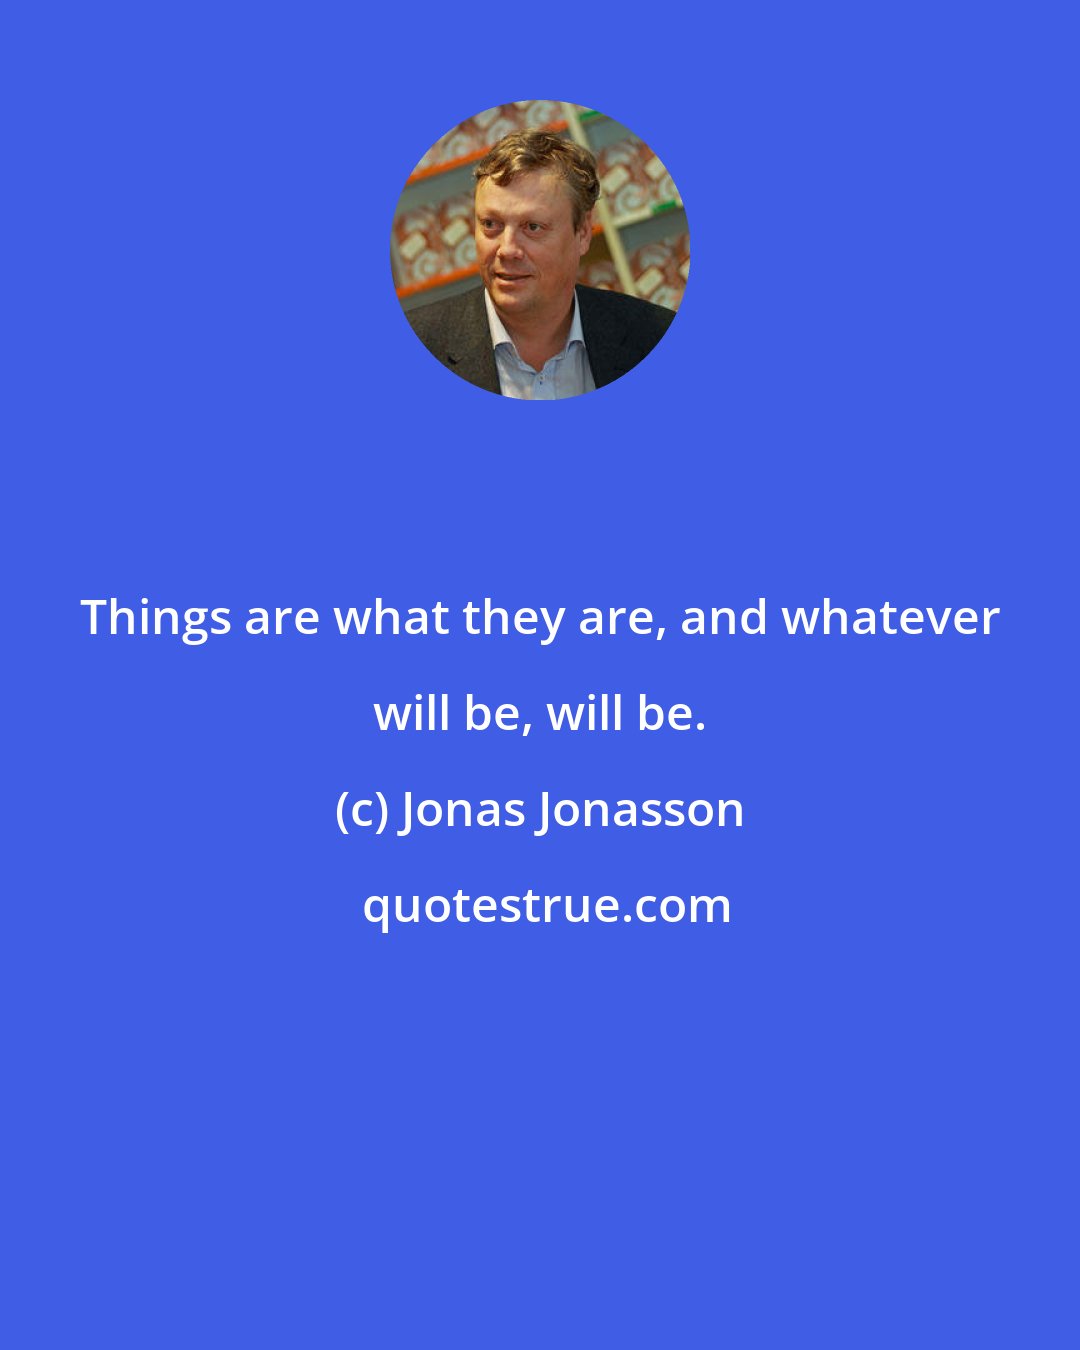 Jonas Jonasson: Things are what they are, and whatever will be, will be.